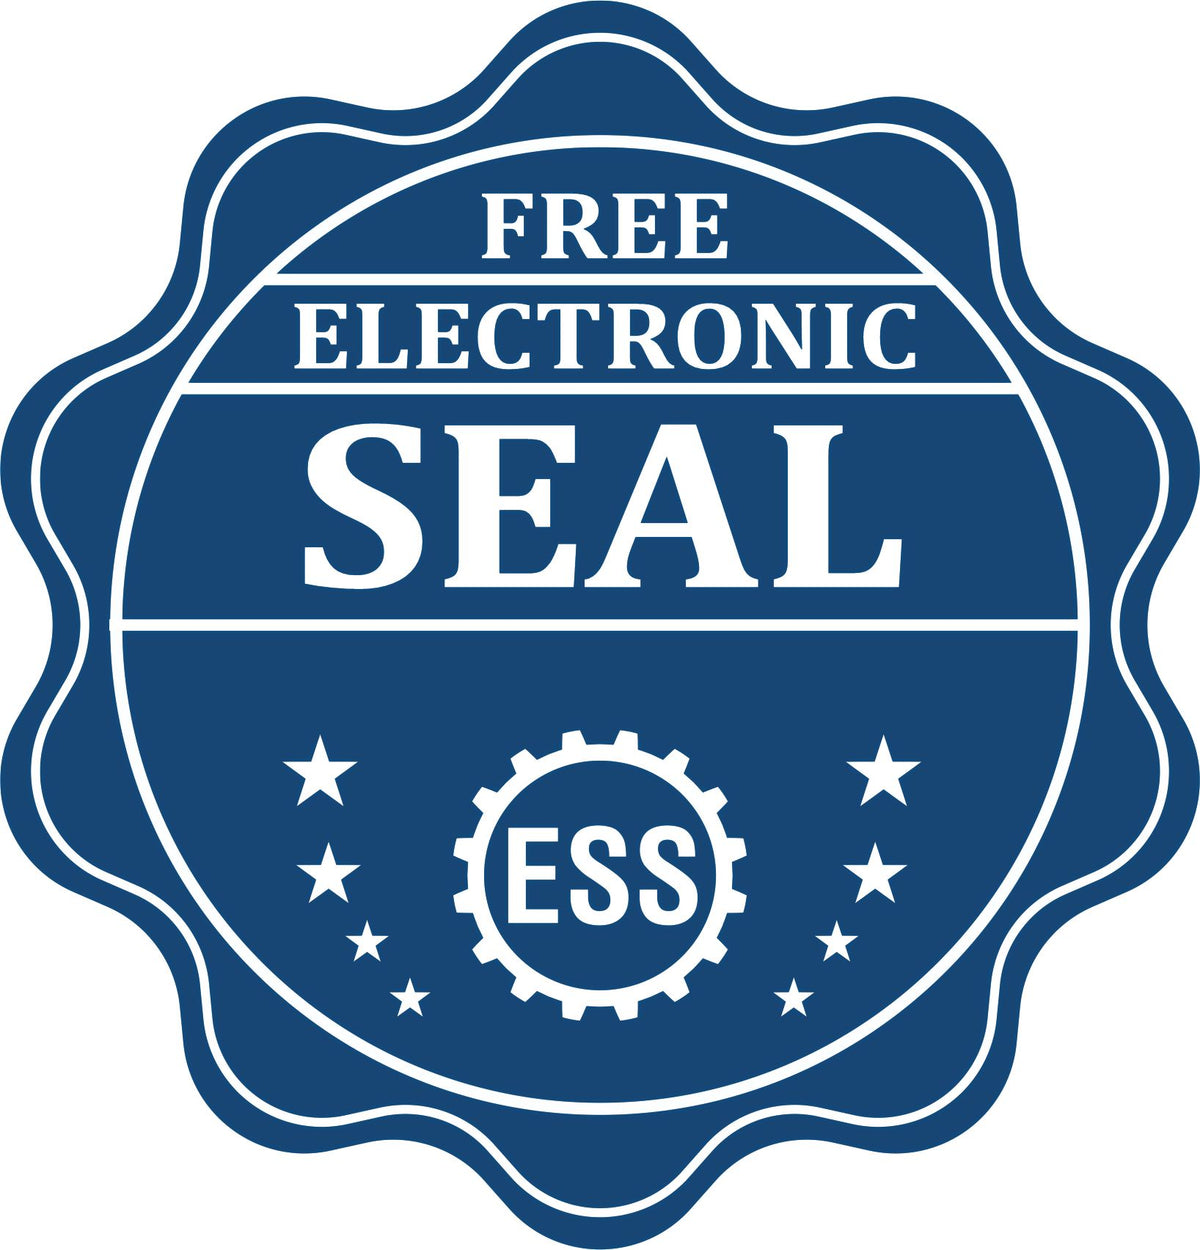 A badge showing a free electronic seal for the Hybrid New Hampshire Engineer Seal with stars and the ESS gear on the emblem.